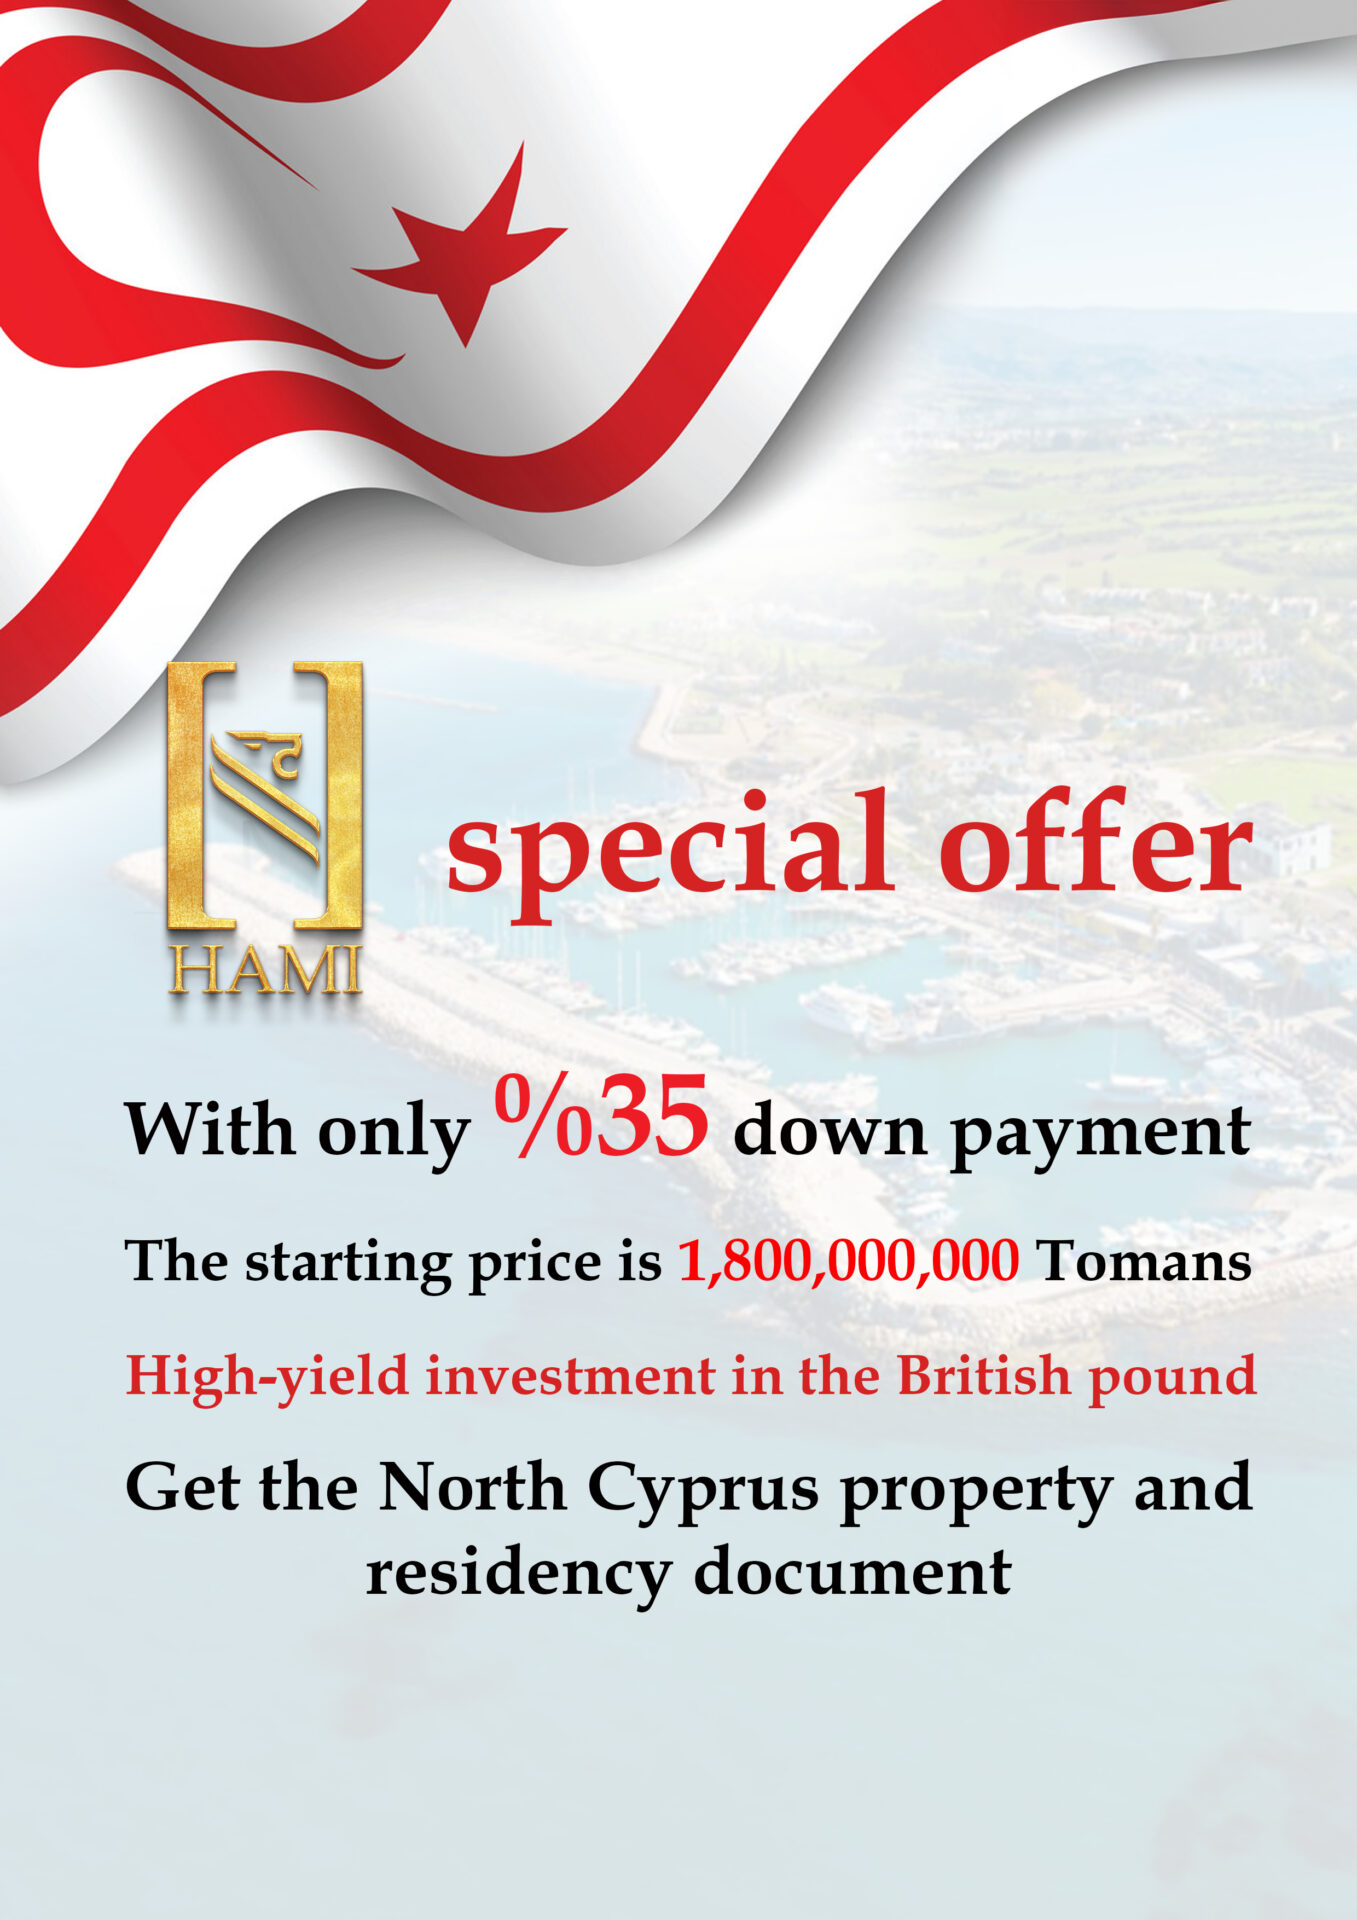 Investment and residence in North Cyprus with 35% advance payment